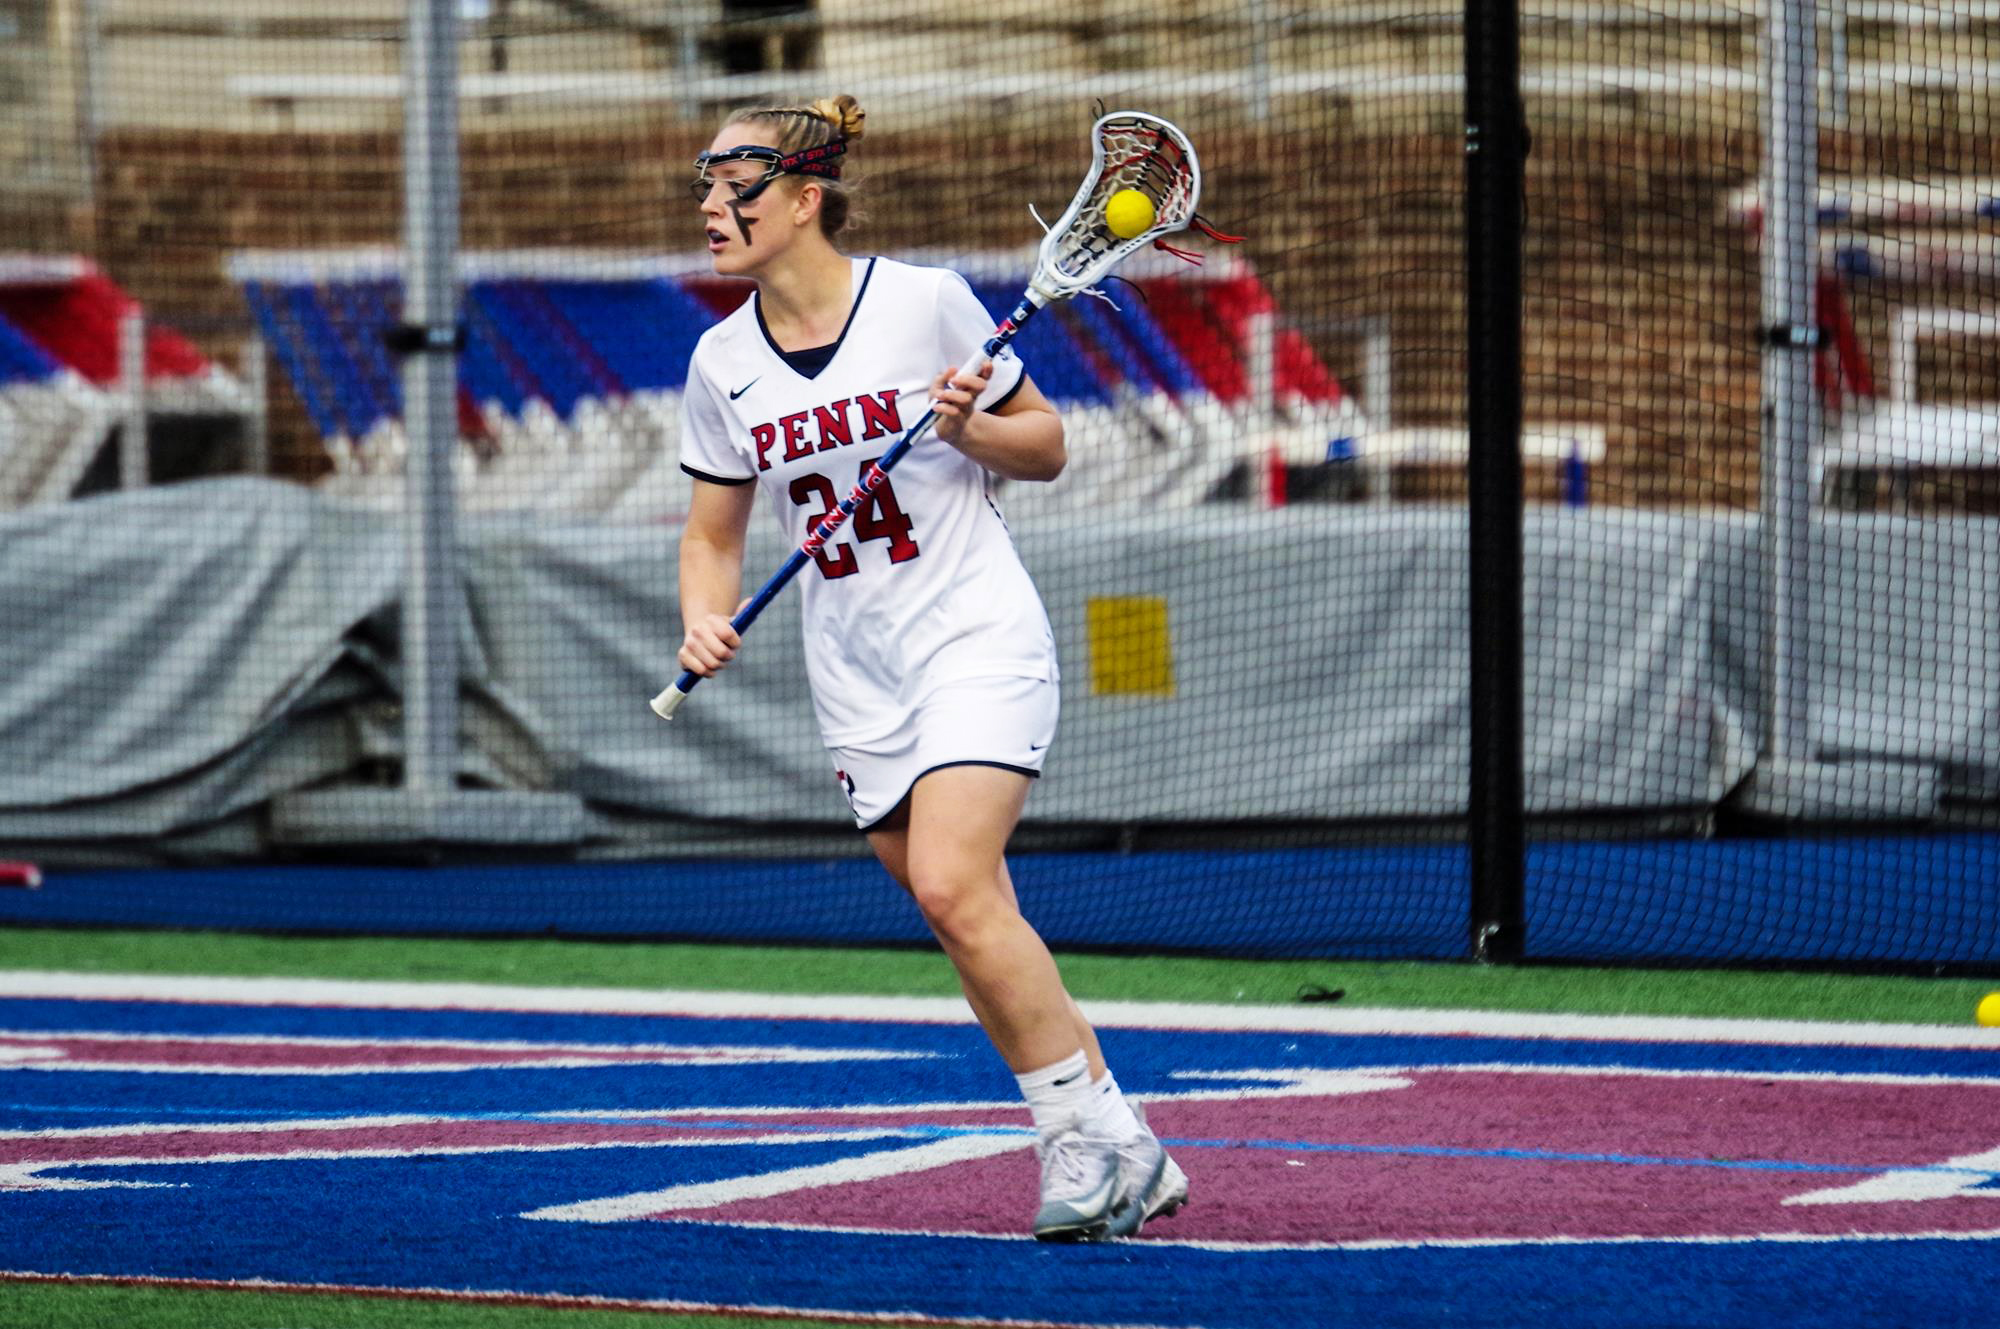 Gabby Rosenzweig of the women's lacrosse team holds her stick with a ball in it during a game.